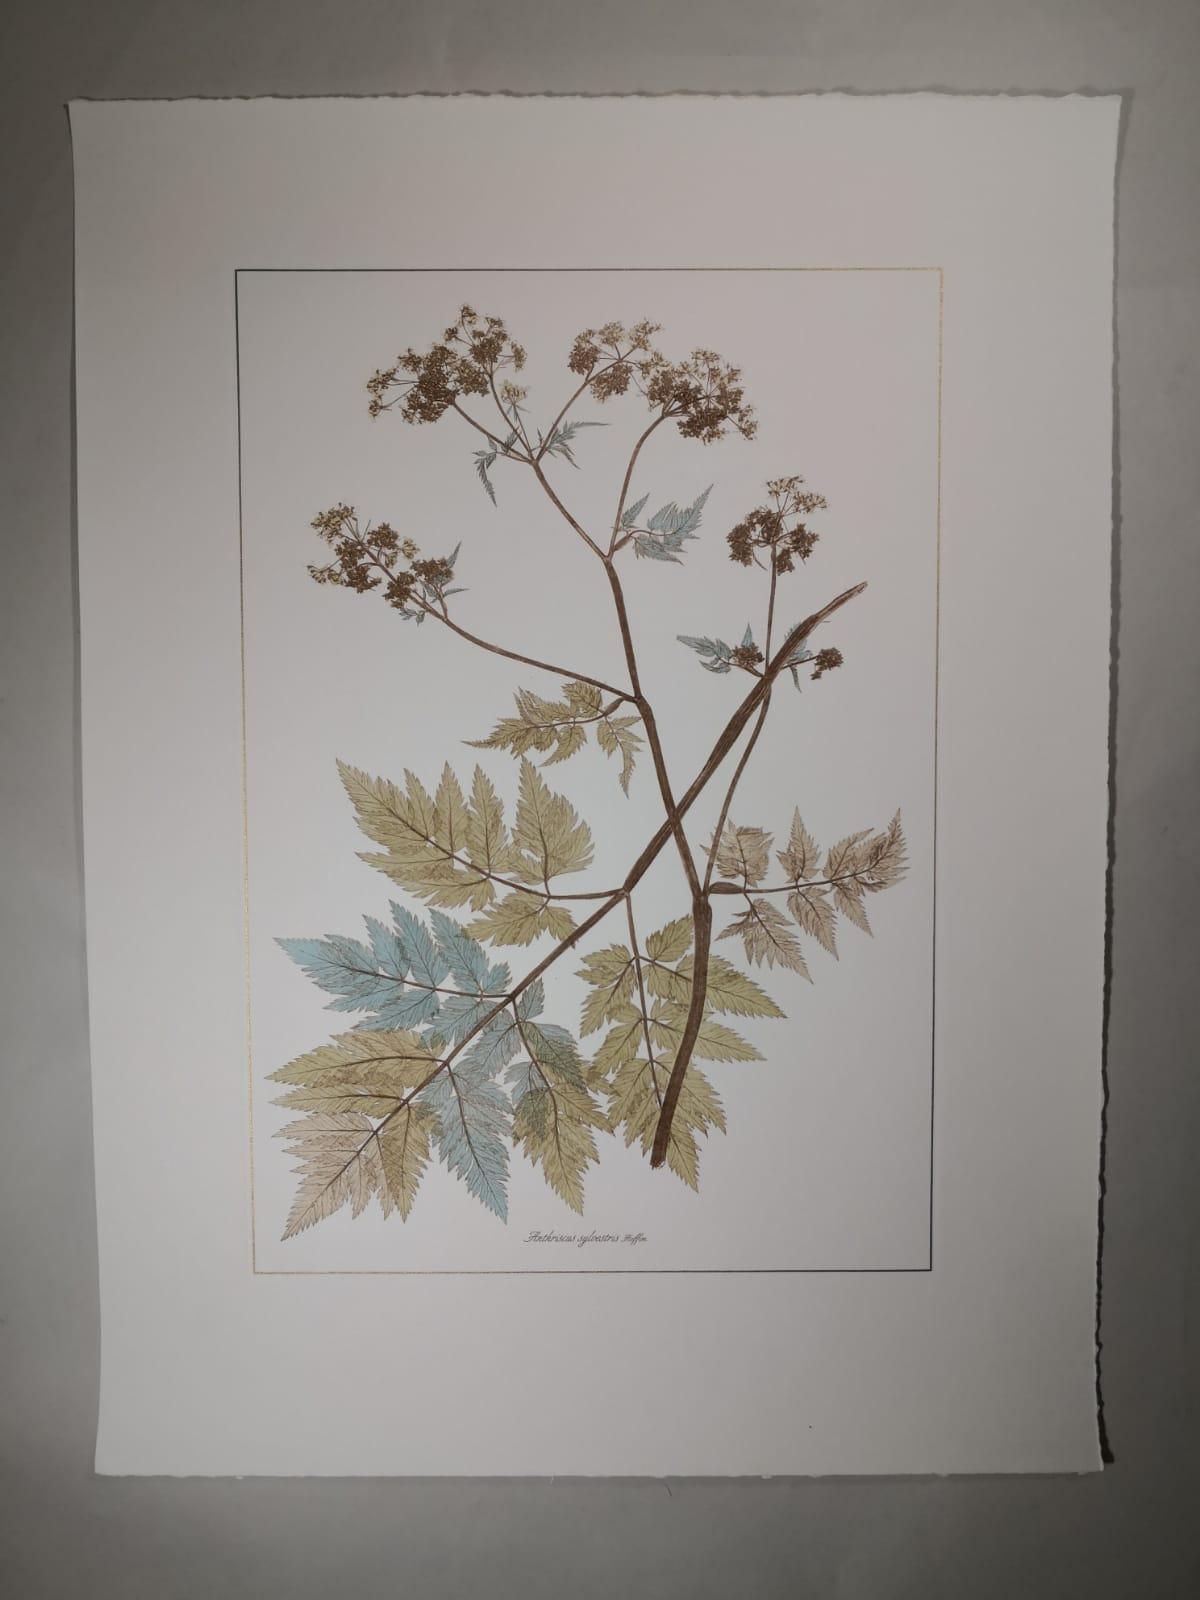 Elegant hand-watercoloured print representing the herbaceous biennial plant Anthriscus sylvestris, known as cow parsley. 

This botanical style print is available in 4 different natural representations to create a bright and joyful